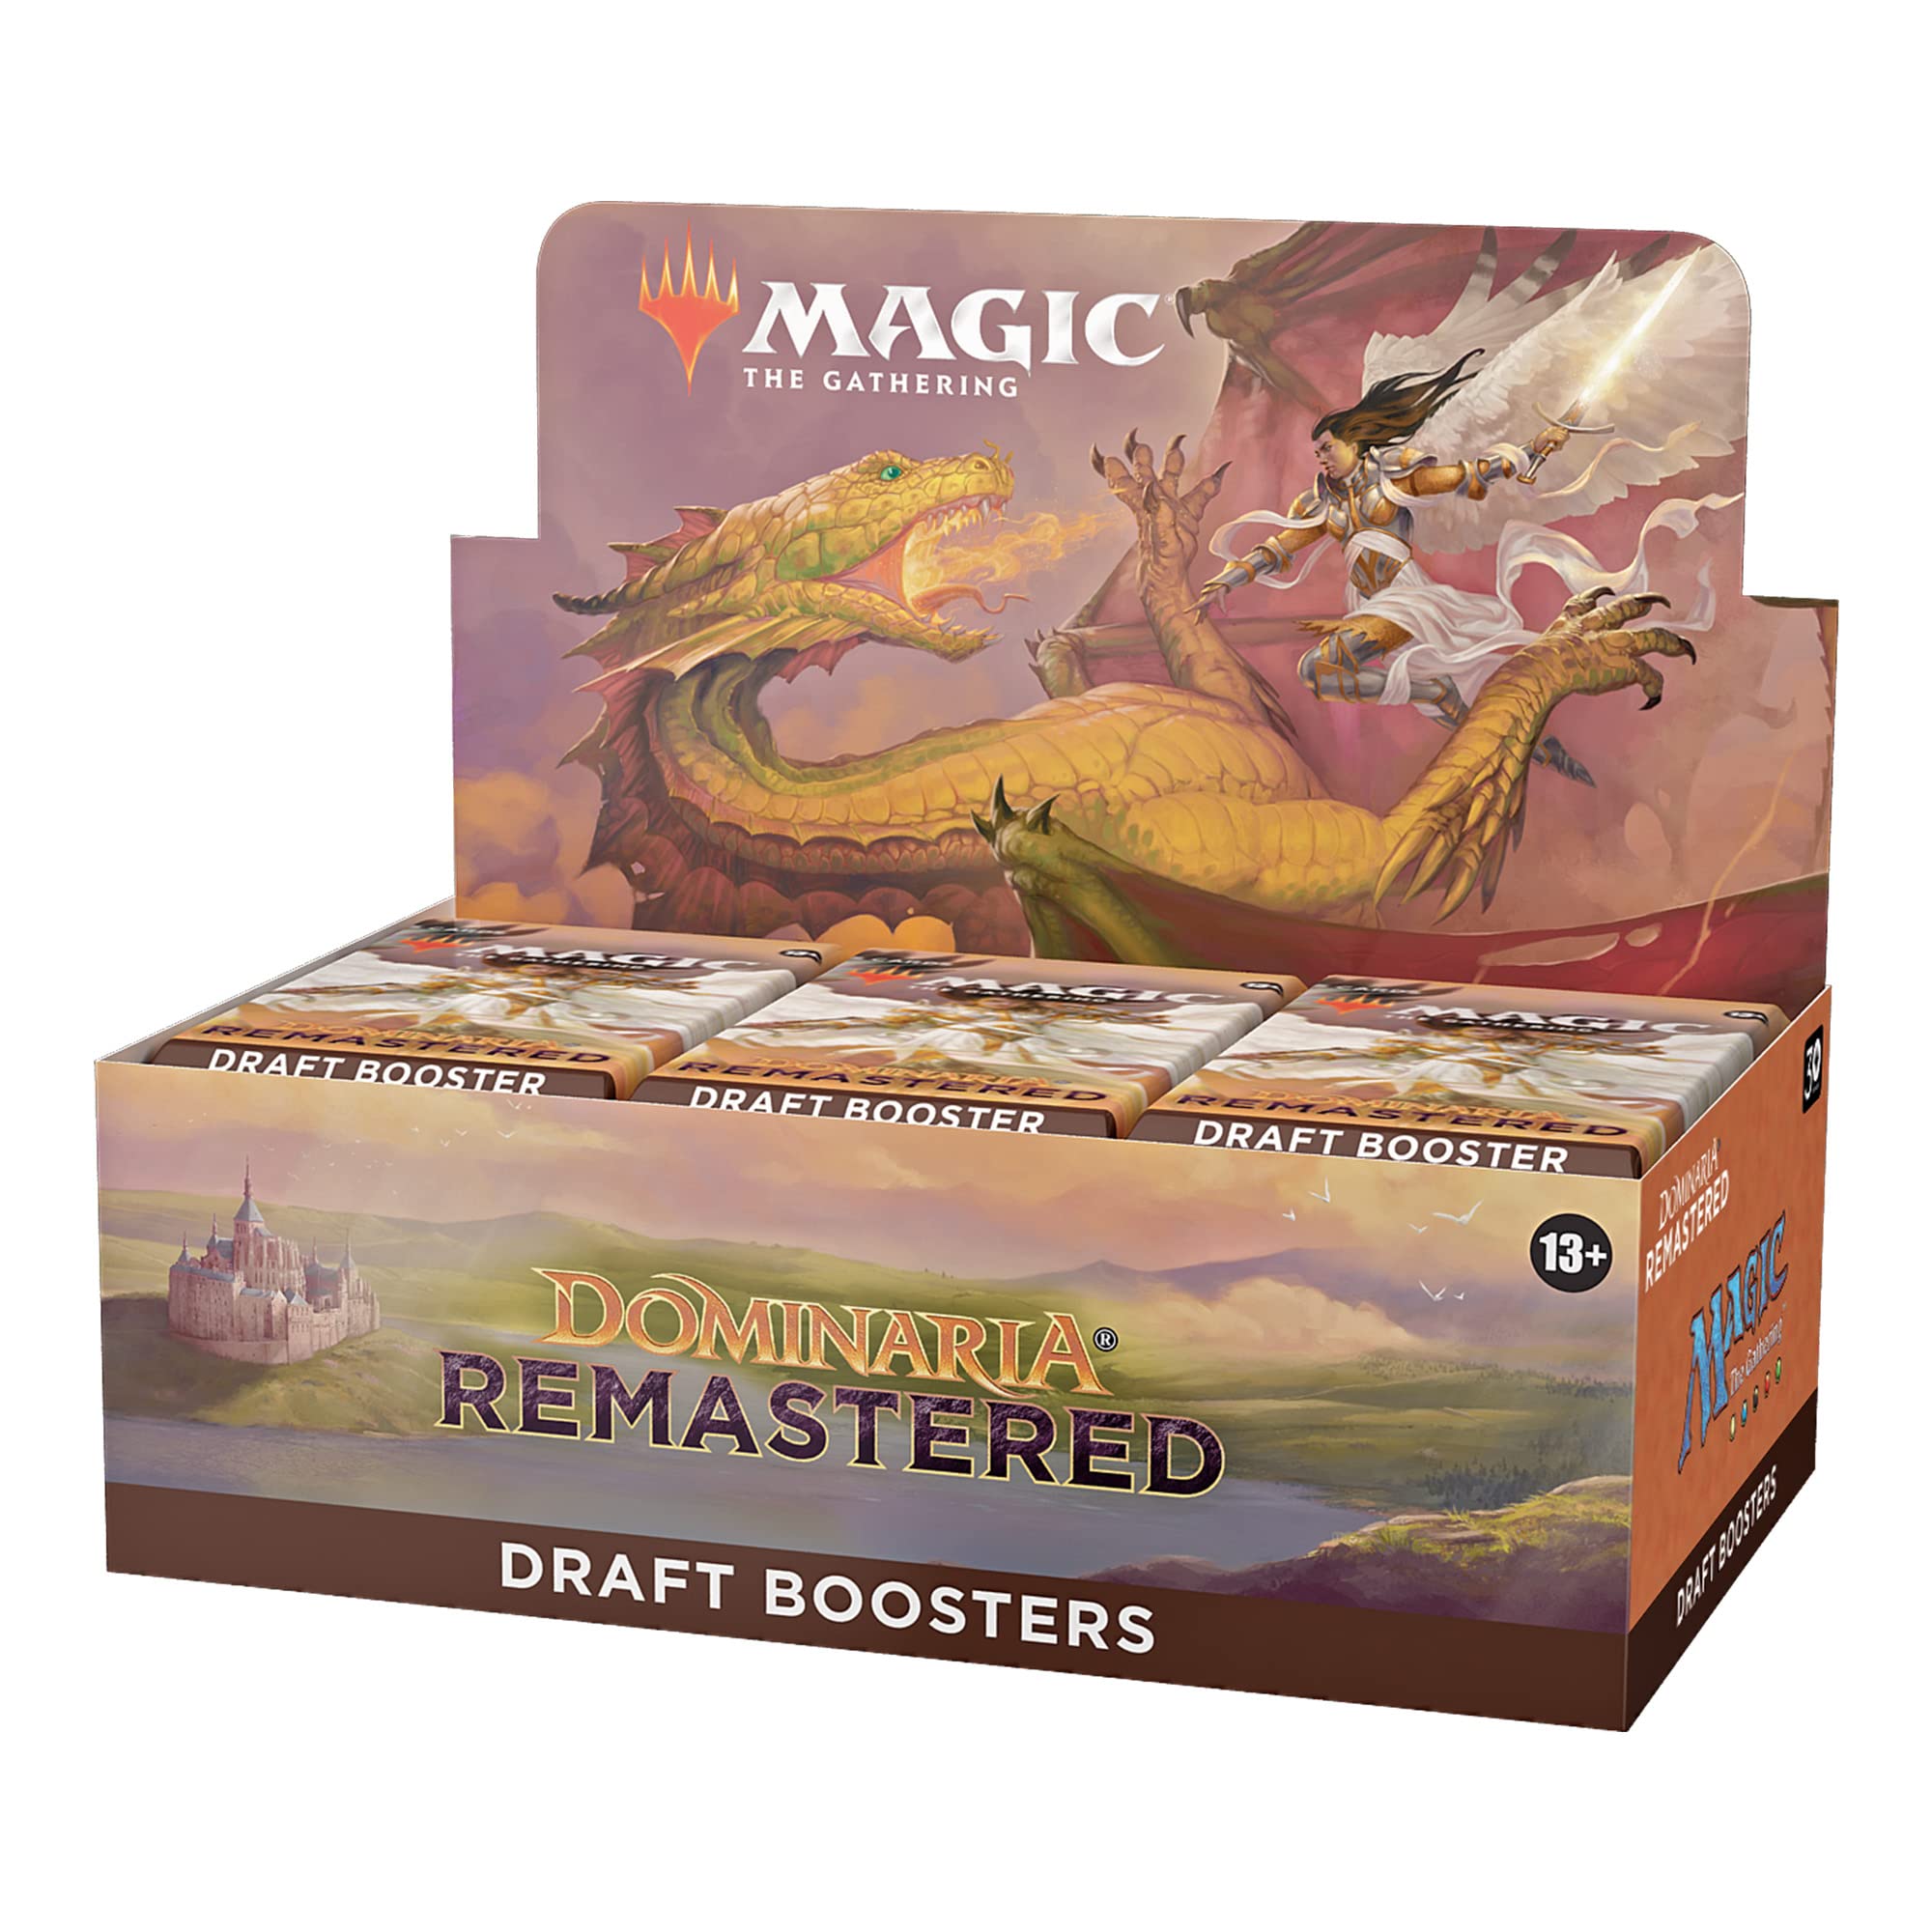 Magic: The Gathering Dominaria Remastered Draft Booster Box, 36 Packs (Englische Version)